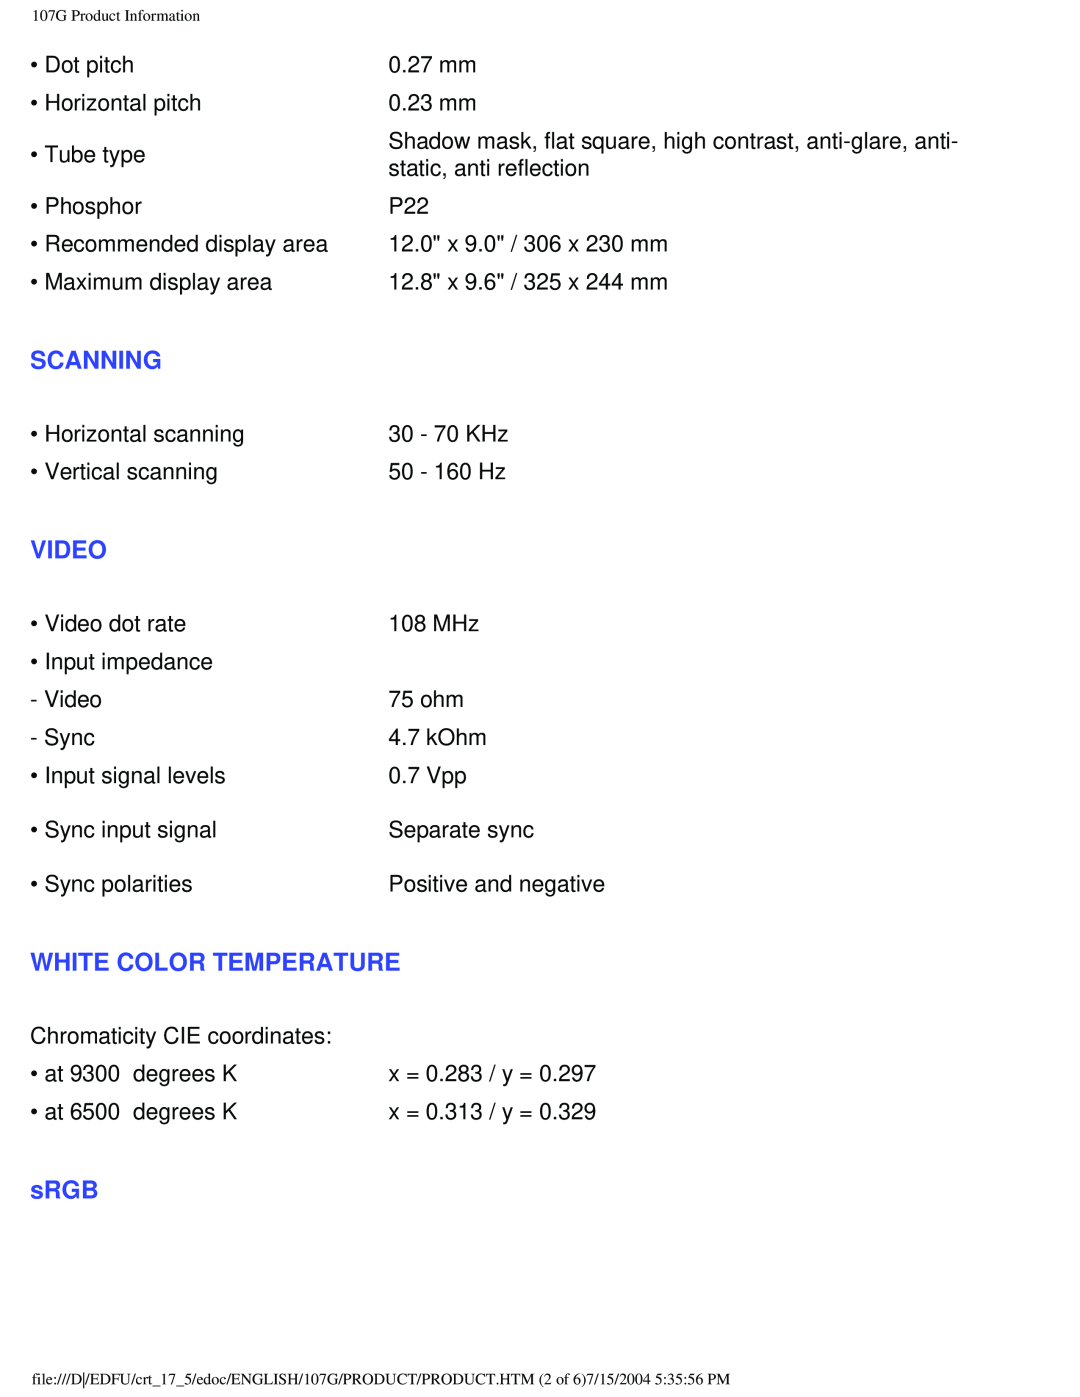 Philips 107G user manual Scanning, Video, White Color Temperature, sRGB 